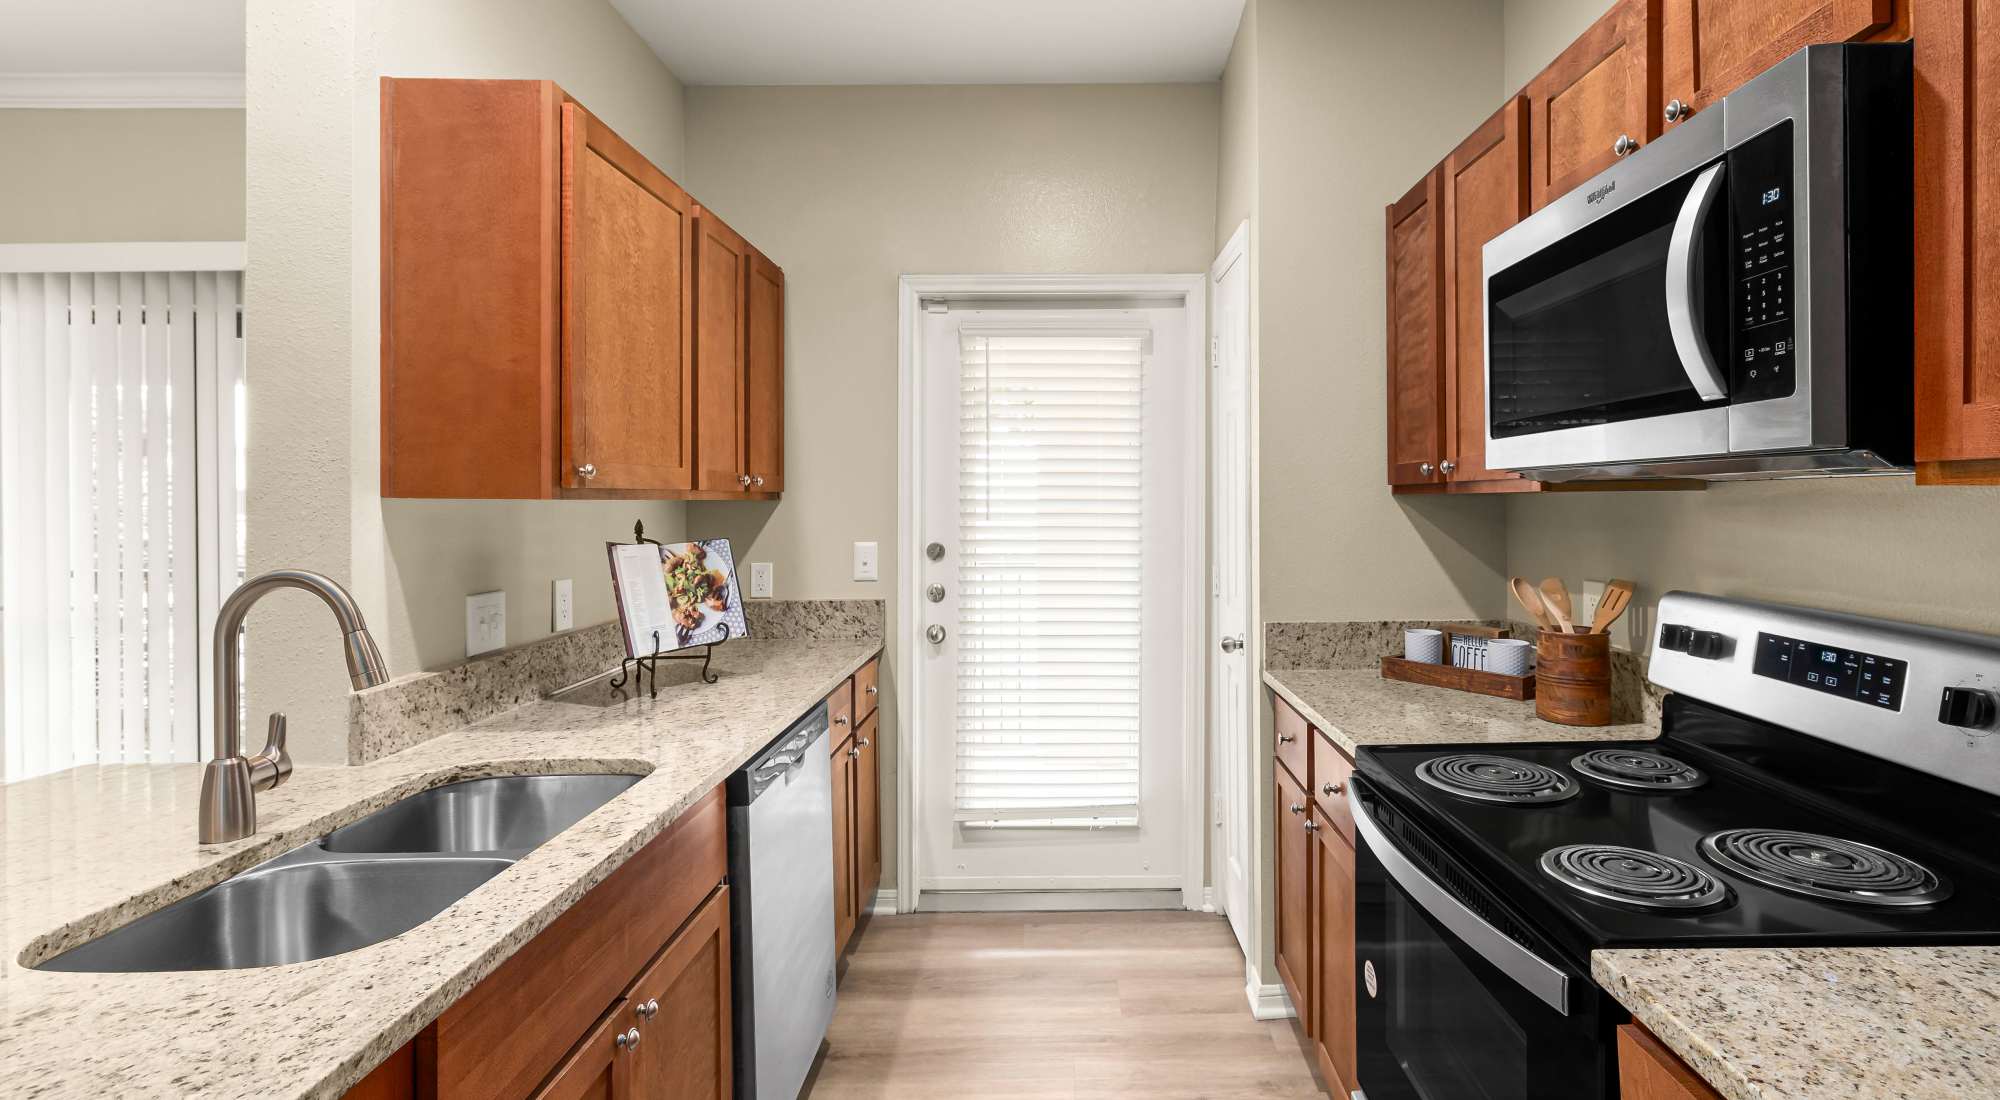 Kitchen with stainless steel appliances at Villas at Medical Center